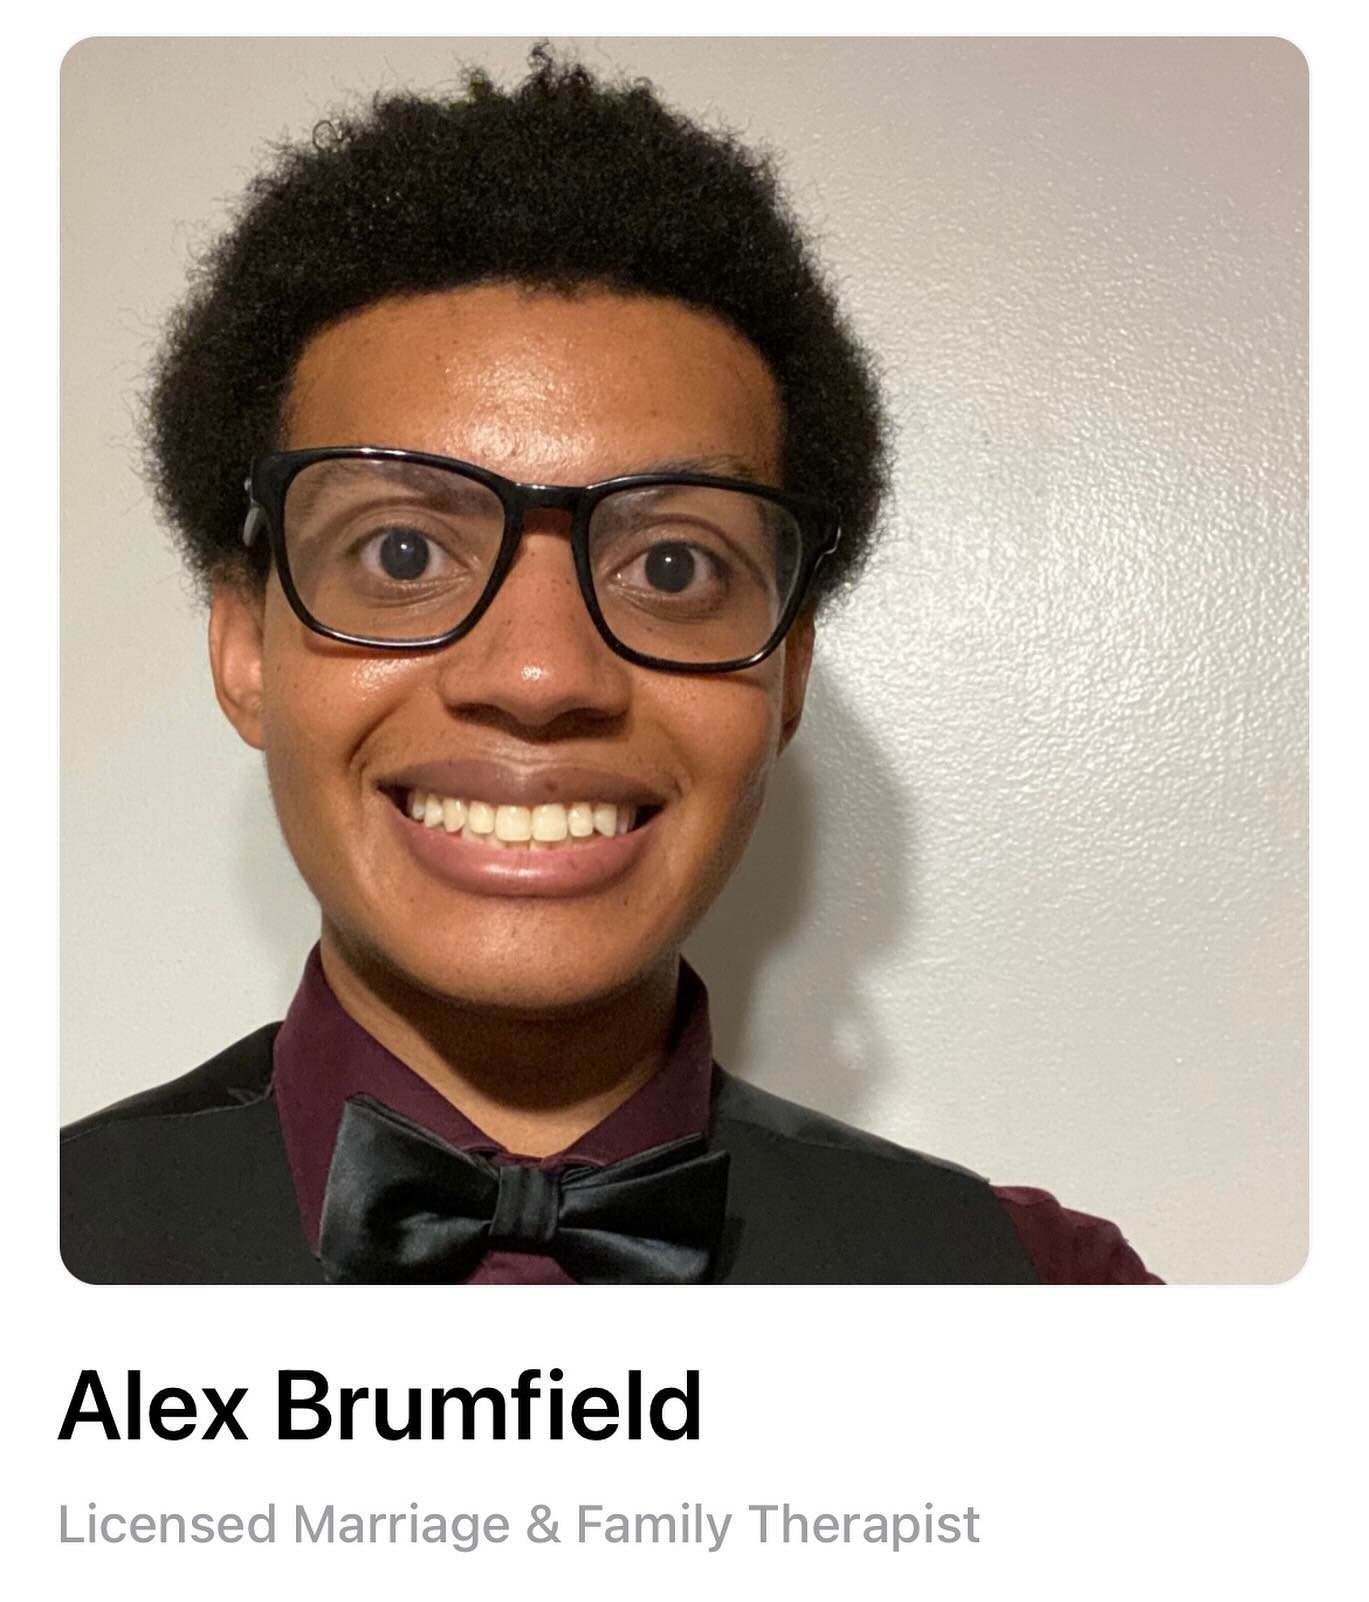 New Member Celebration!! 🎉 

Welcome Alex Brumfield to the Frequency Fam 🙌🏻

Alex (he/him) is a Licensed Marriage &amp; Family Therapist, and primarily works with young adults, partners, and families. 

Alex aims to support people in managing rela